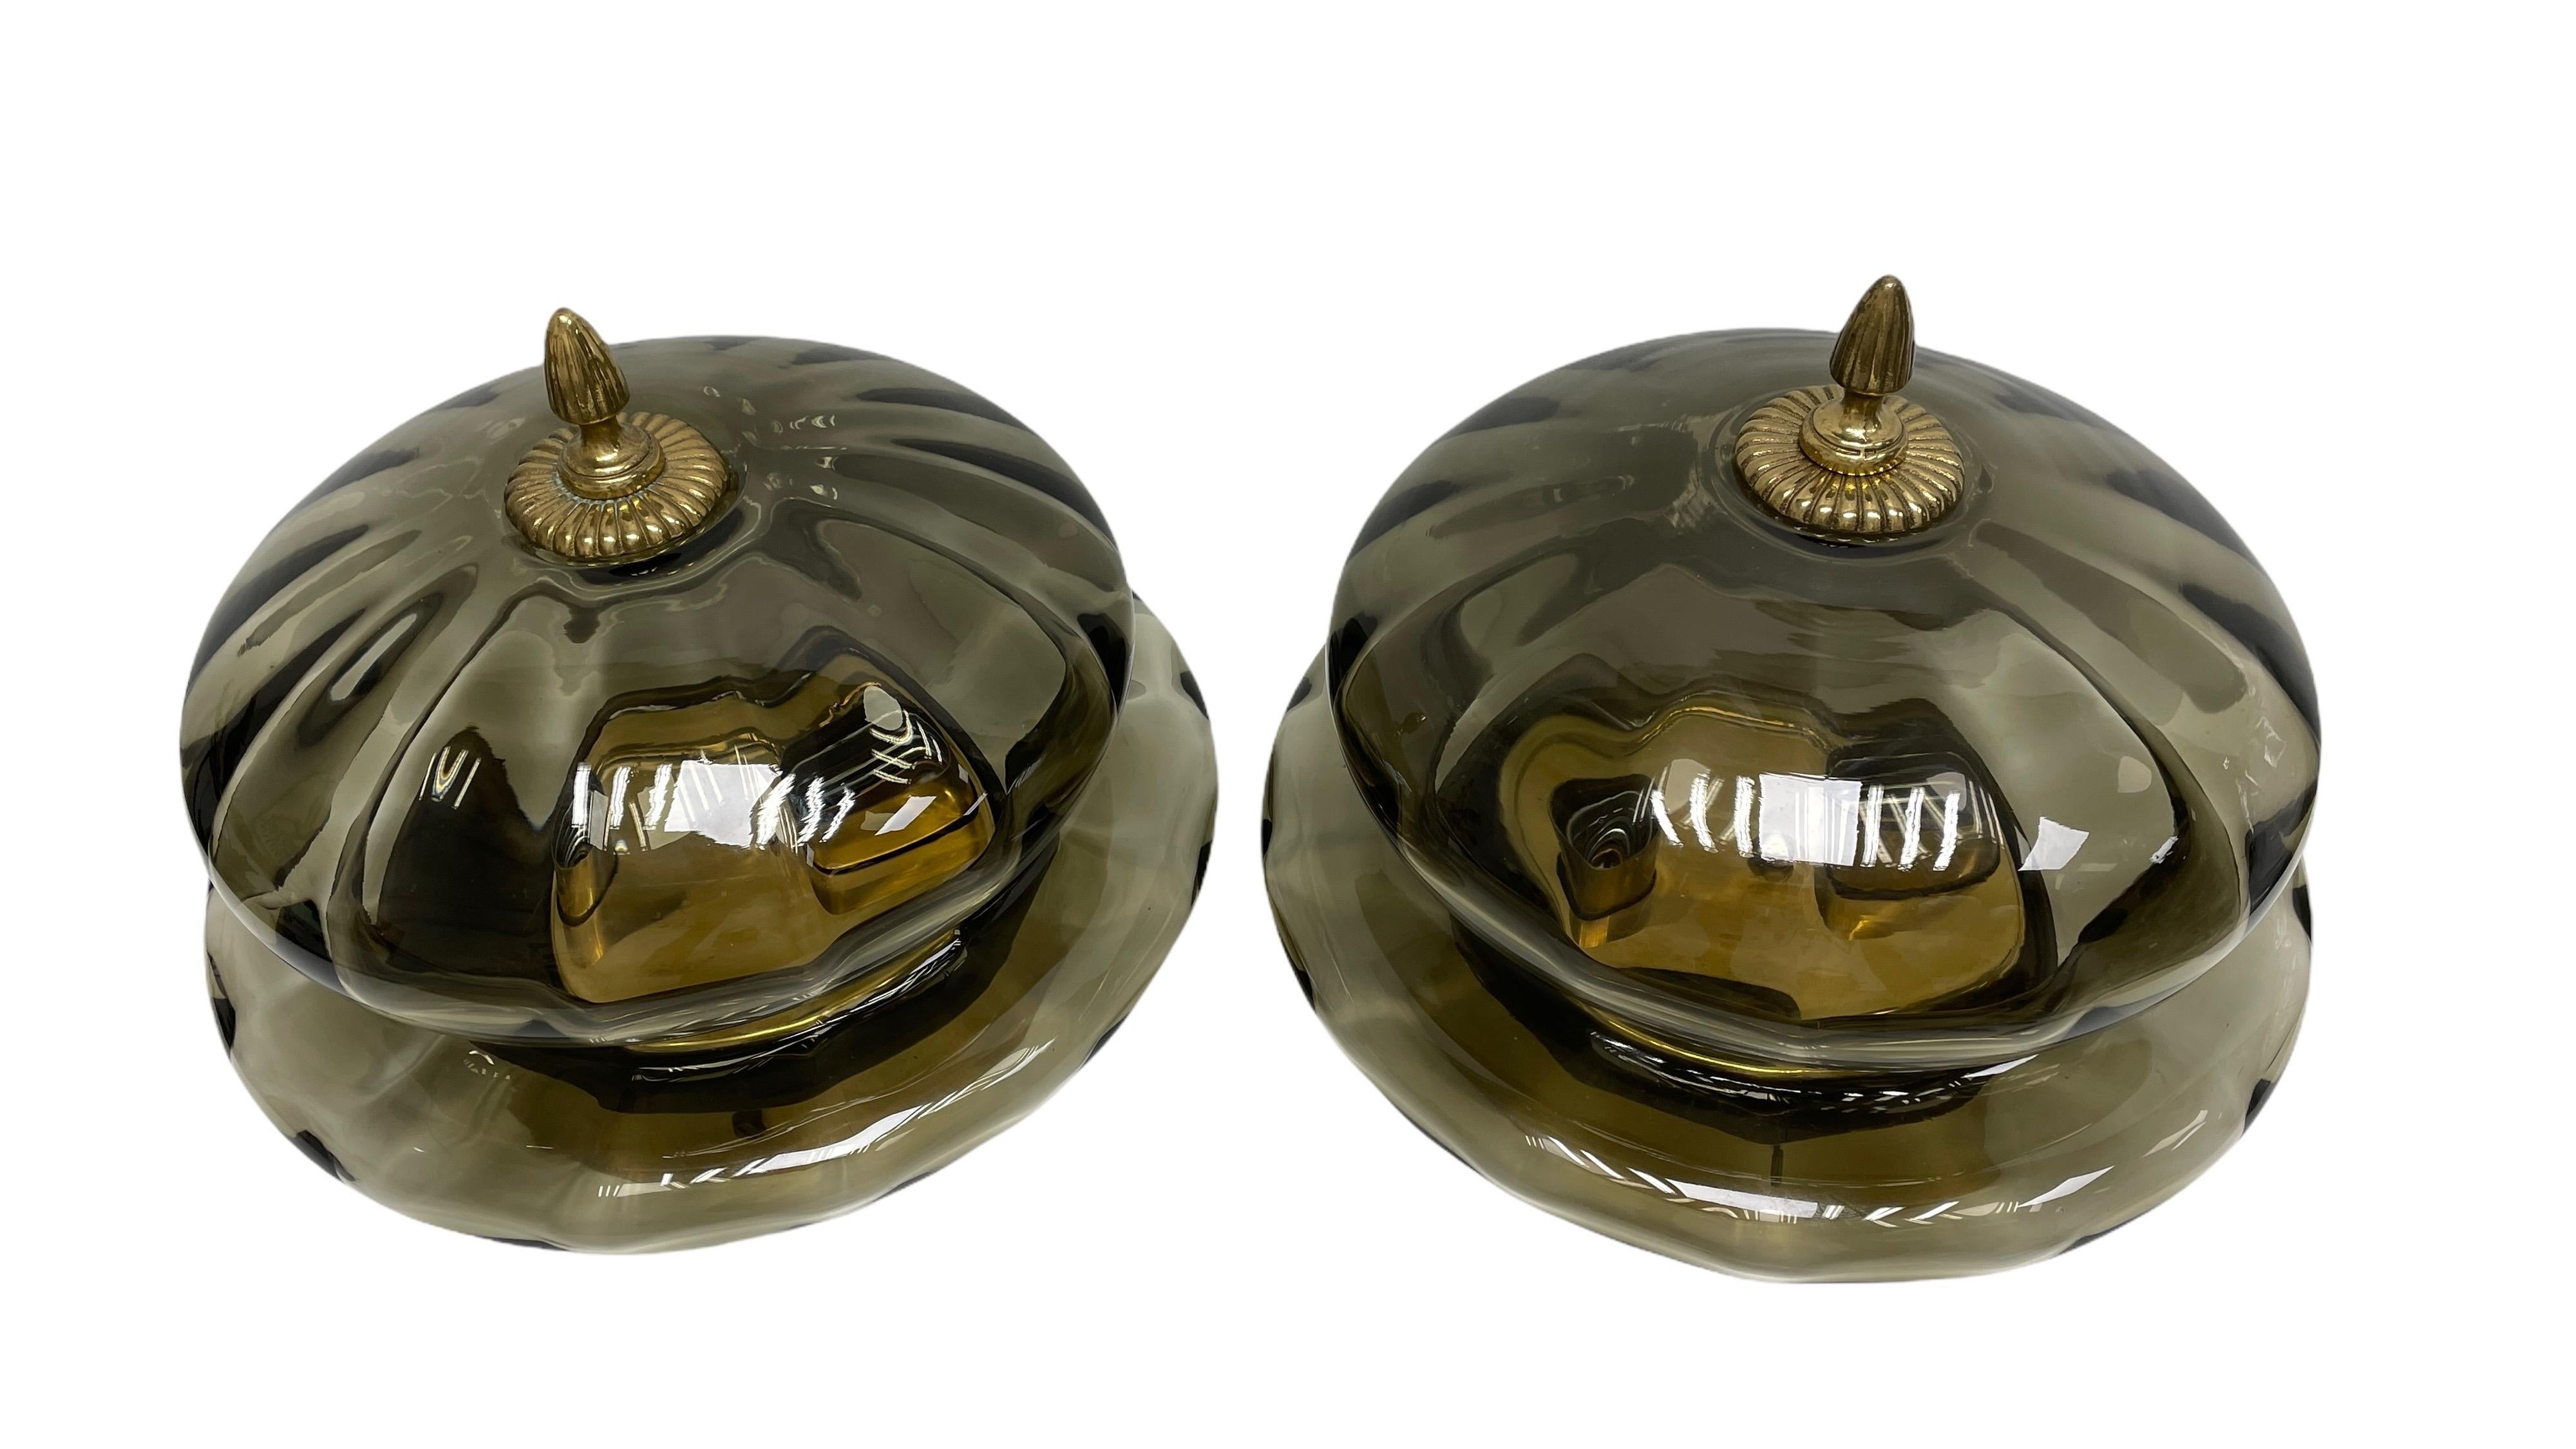 A beautiful pair of gorgeous glass flush mount made by Hillebrand Leuchten Germany. It can be used also as a sconce or wall light. Each light fixture requires two European E27 bulbs, up to 60 watts each socket. Grey Smoked glass, mounted on a brass